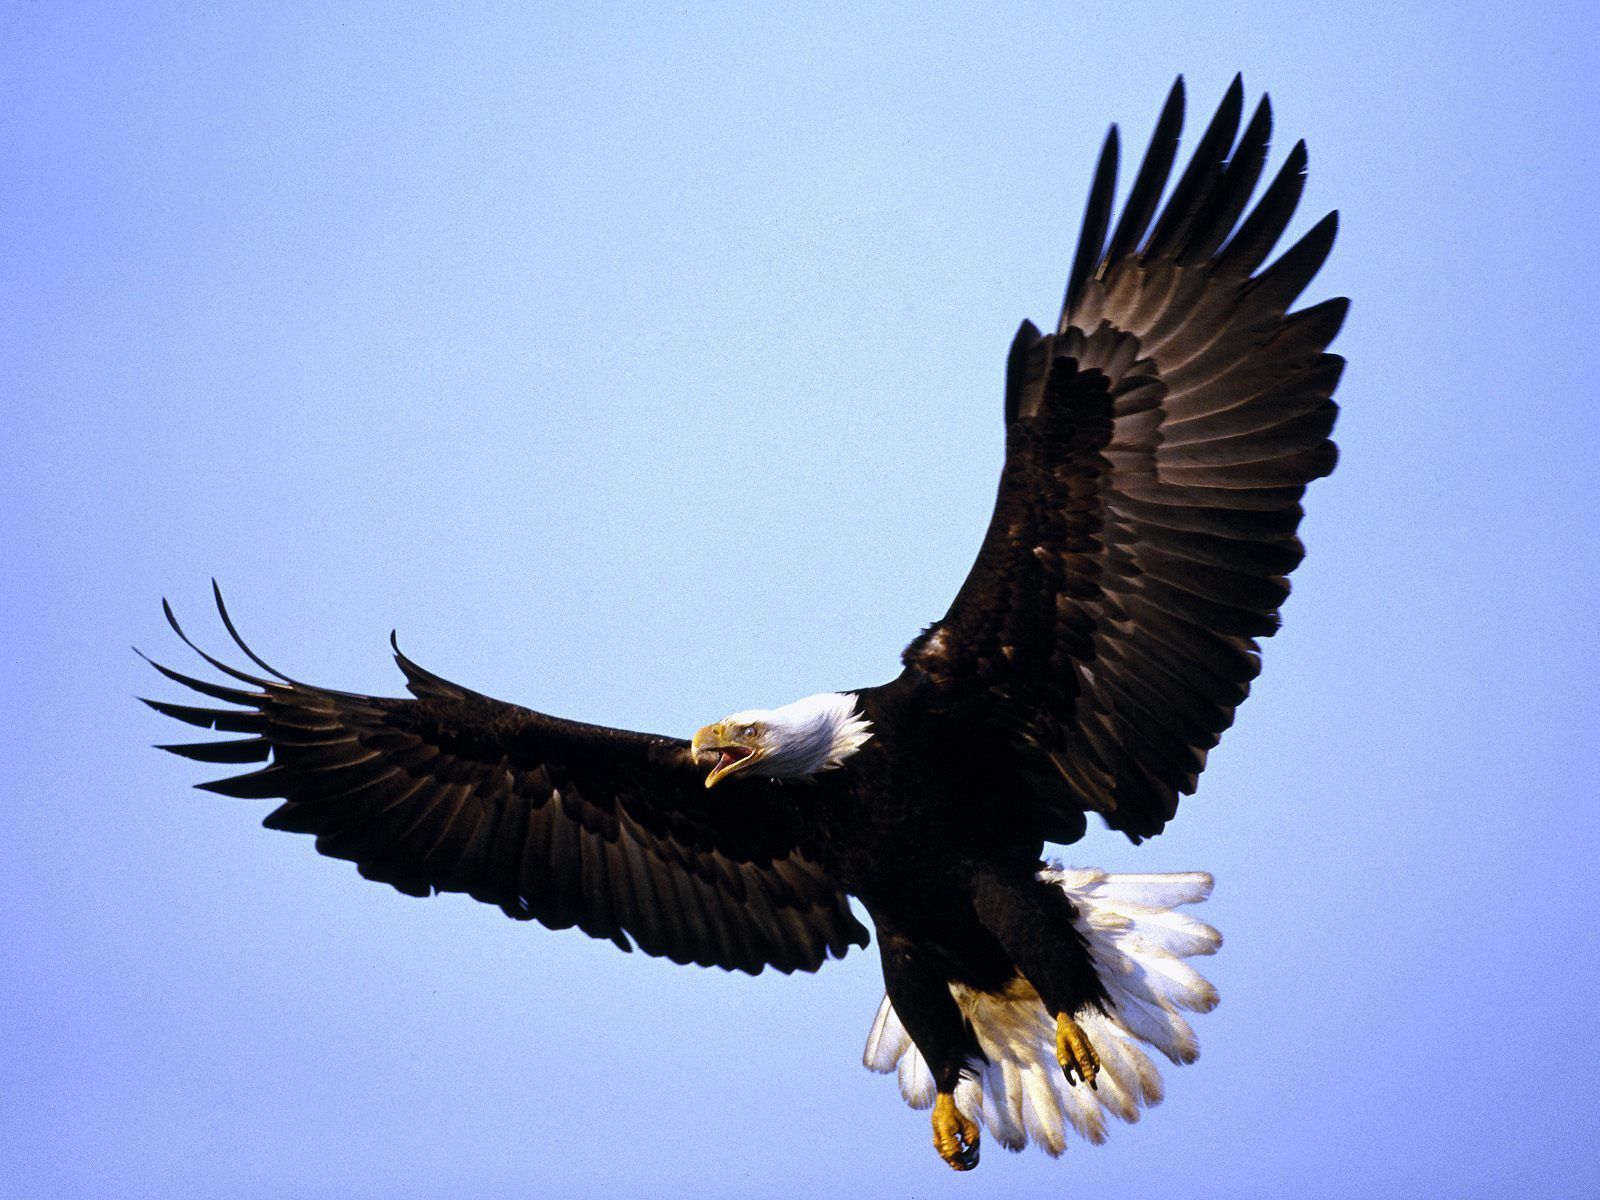 Magnificent Wings of an Eagle. Орел, Домашние питомцы, Птицы